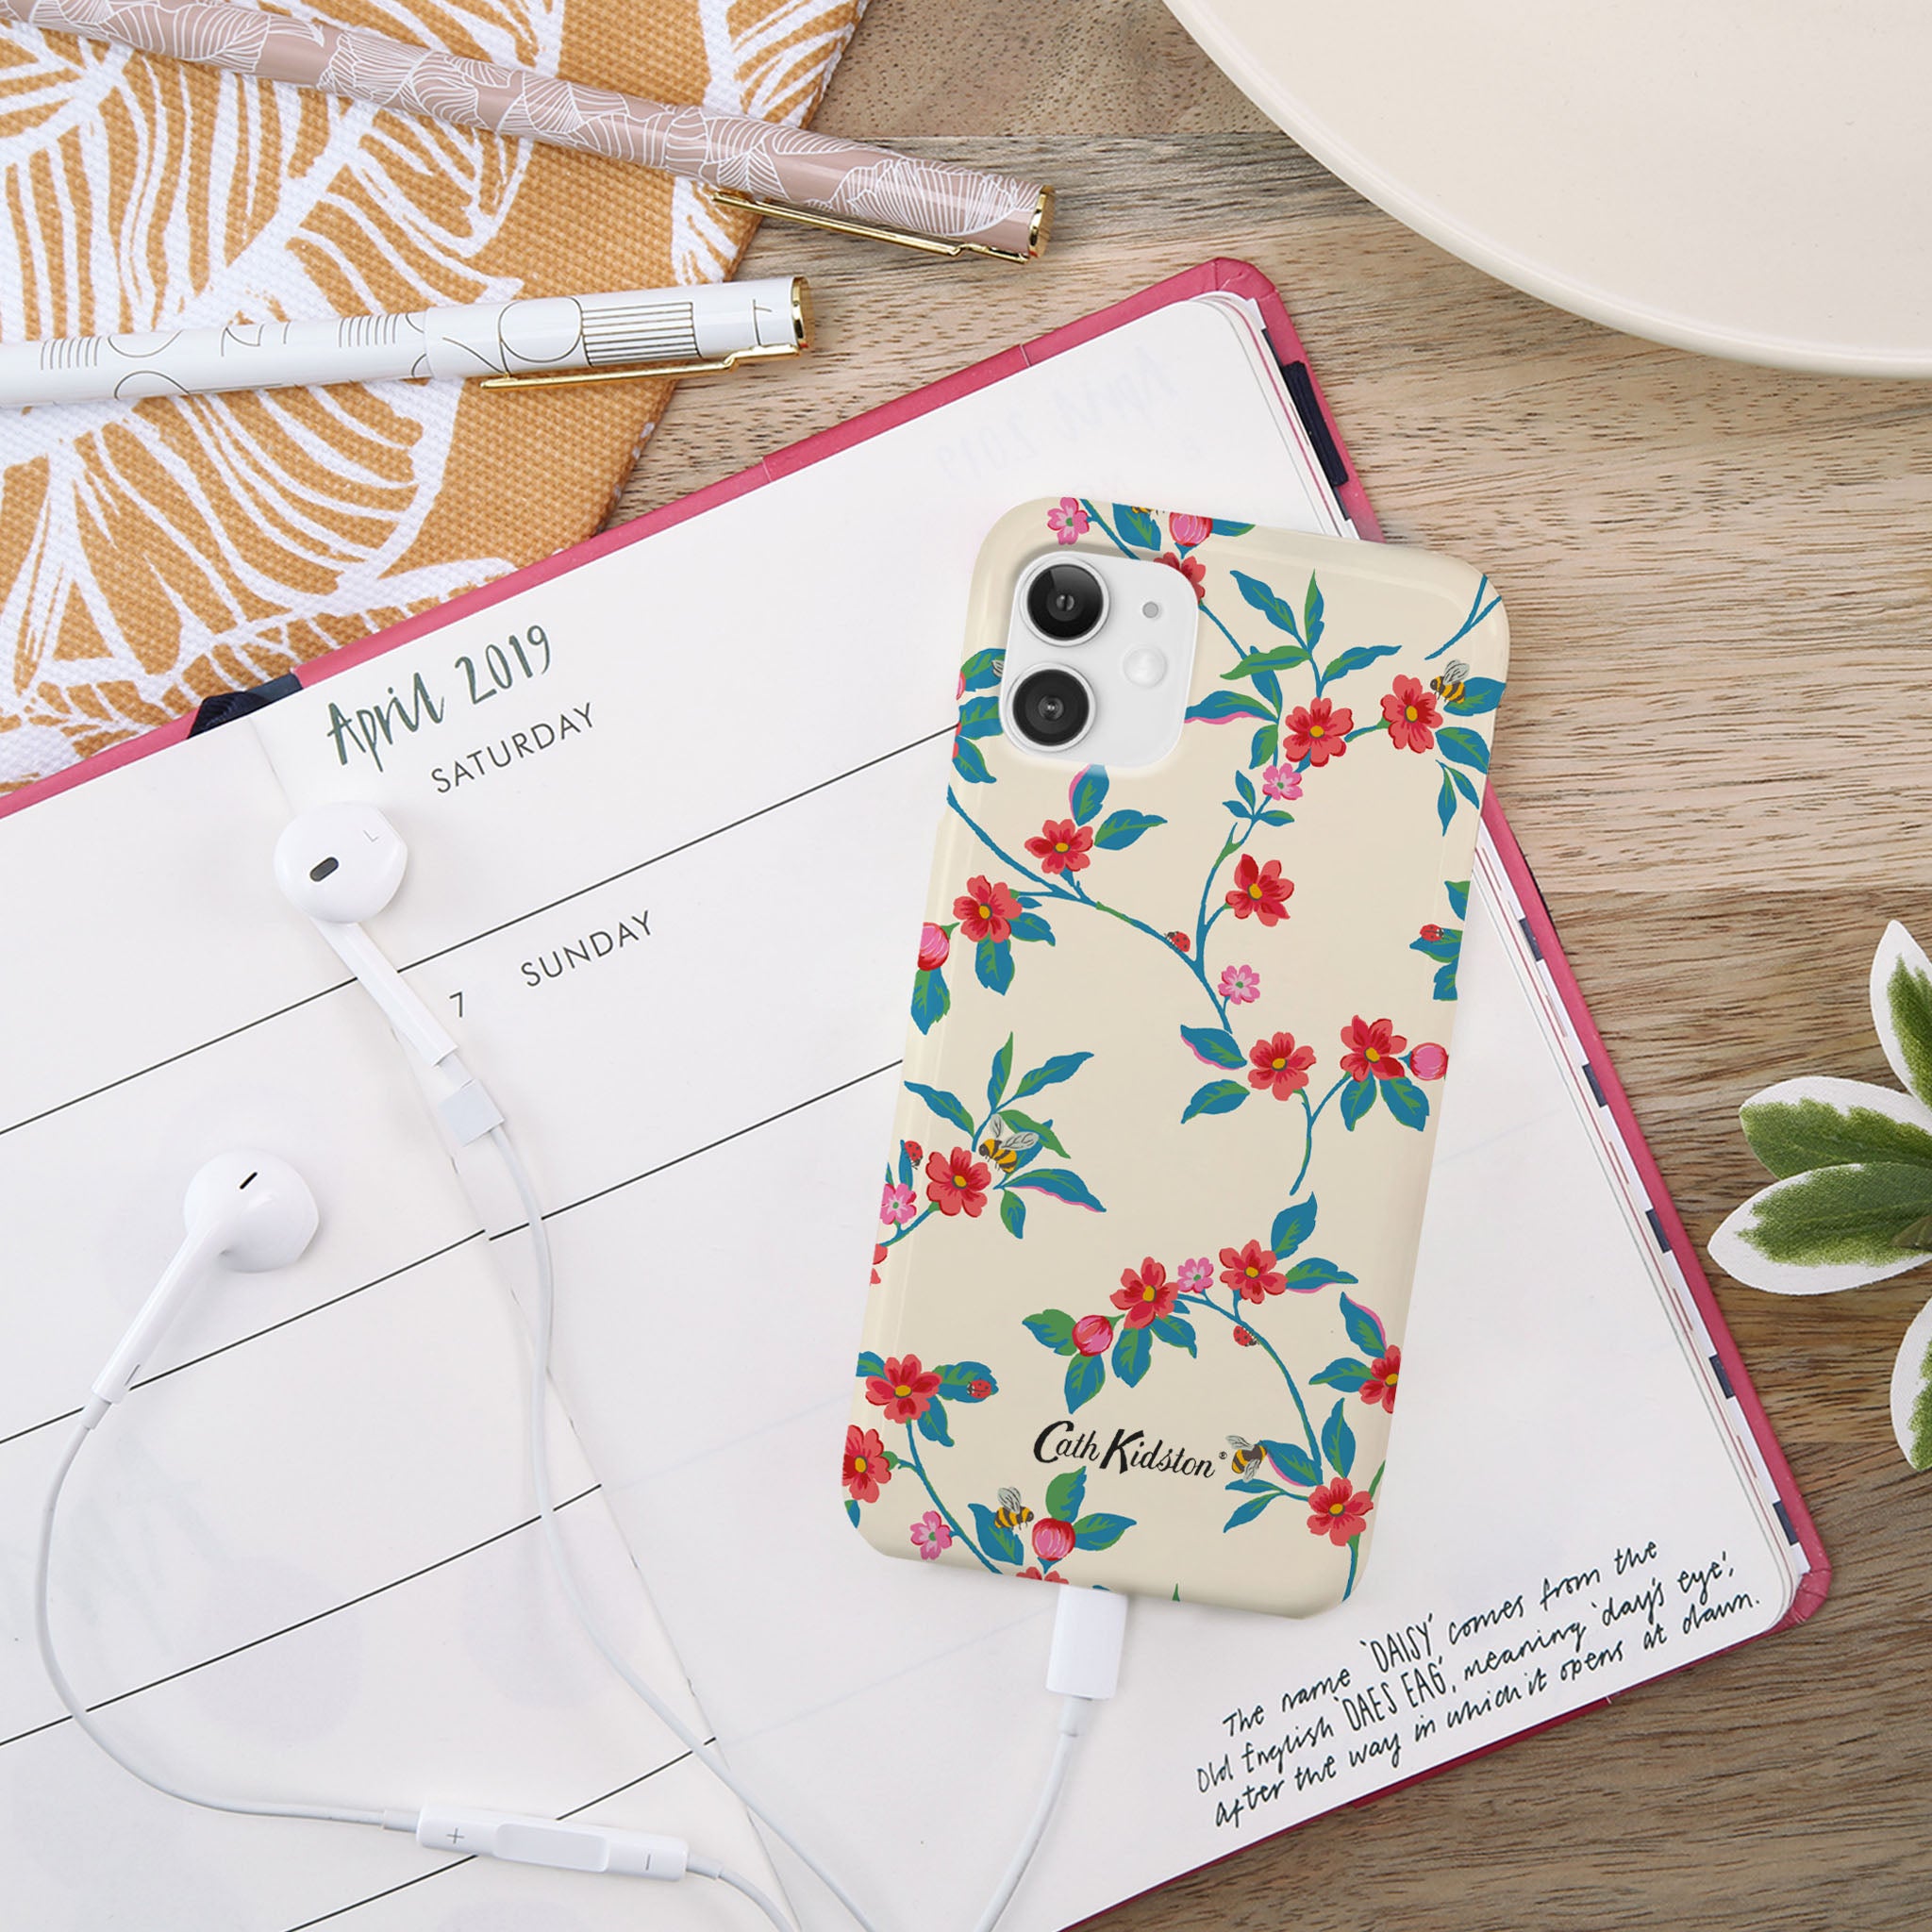 The MYVQ iPhone series 11 premium high gloss scratch-resistant phone case. Featuring a luxurious microfiber insert to cradle and protect your smartphone device.  